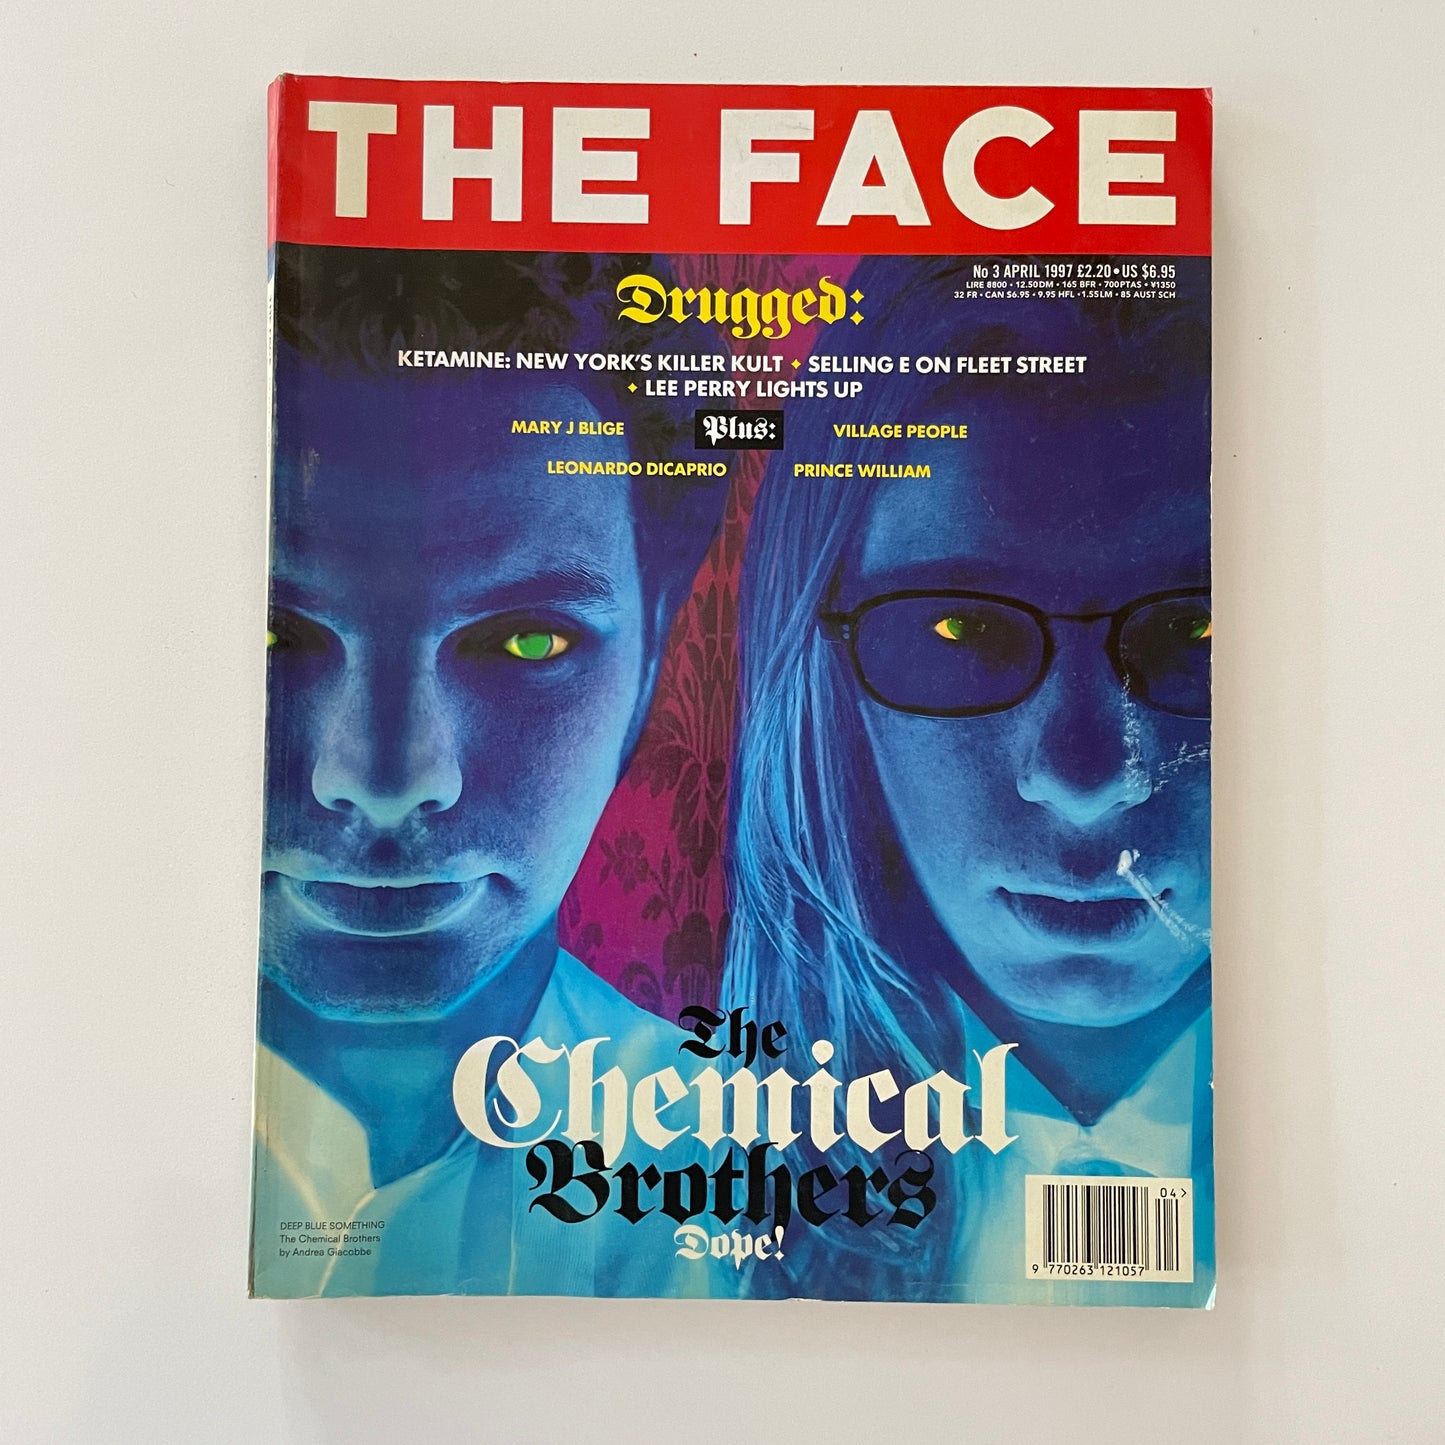 The Face No.3 - April 1997- Chemical Brothers